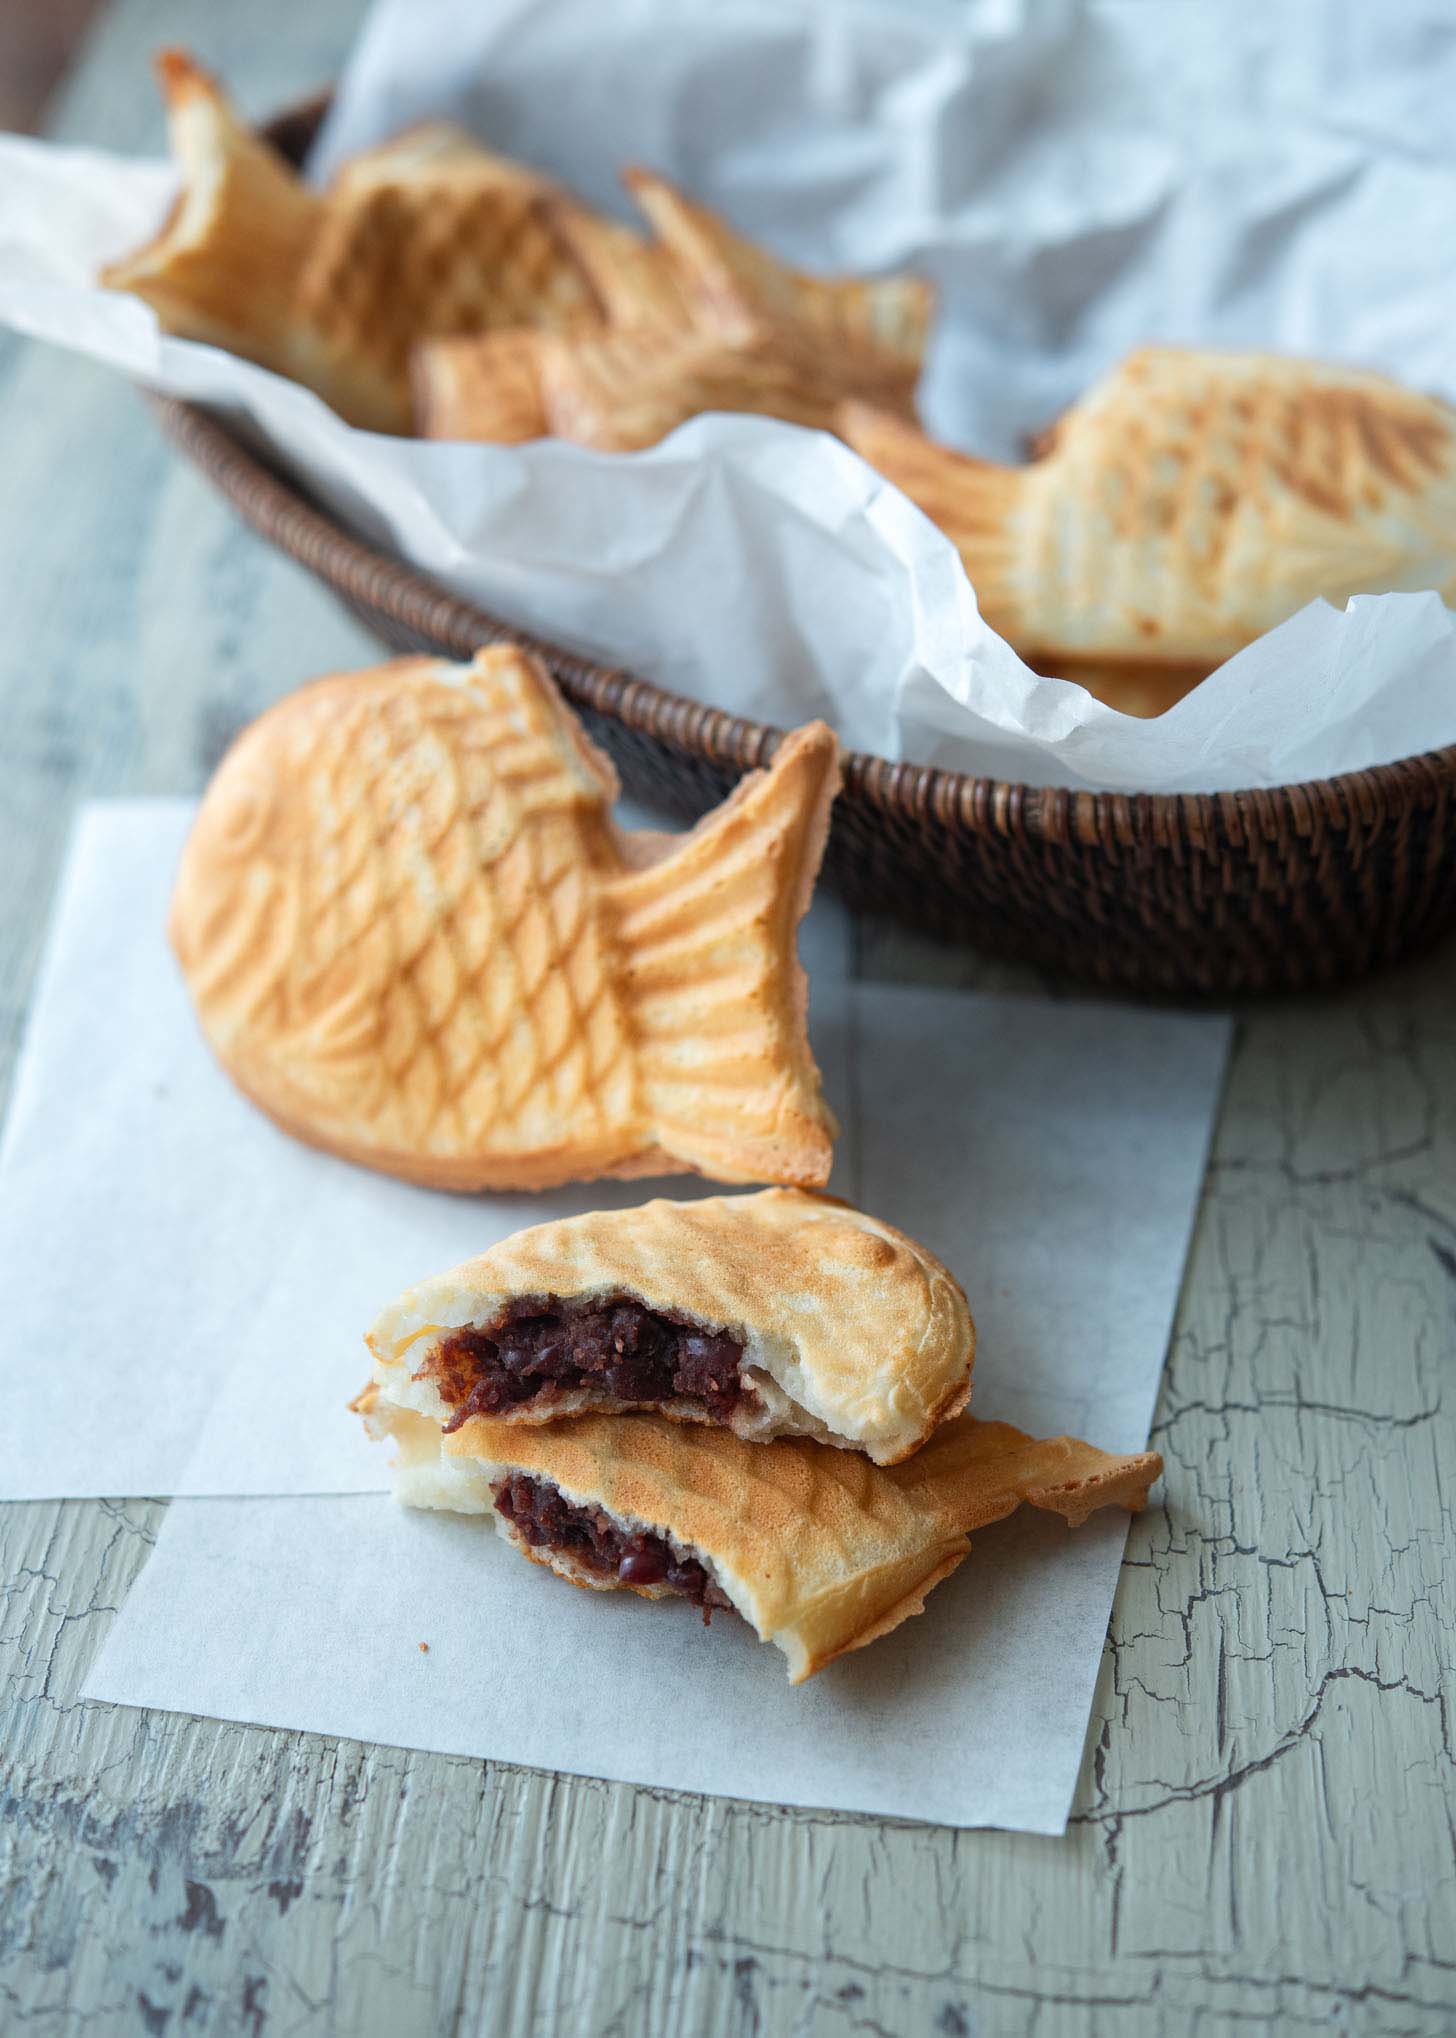 Sweet red bean filling showing inside of Korean fish shaped bread.